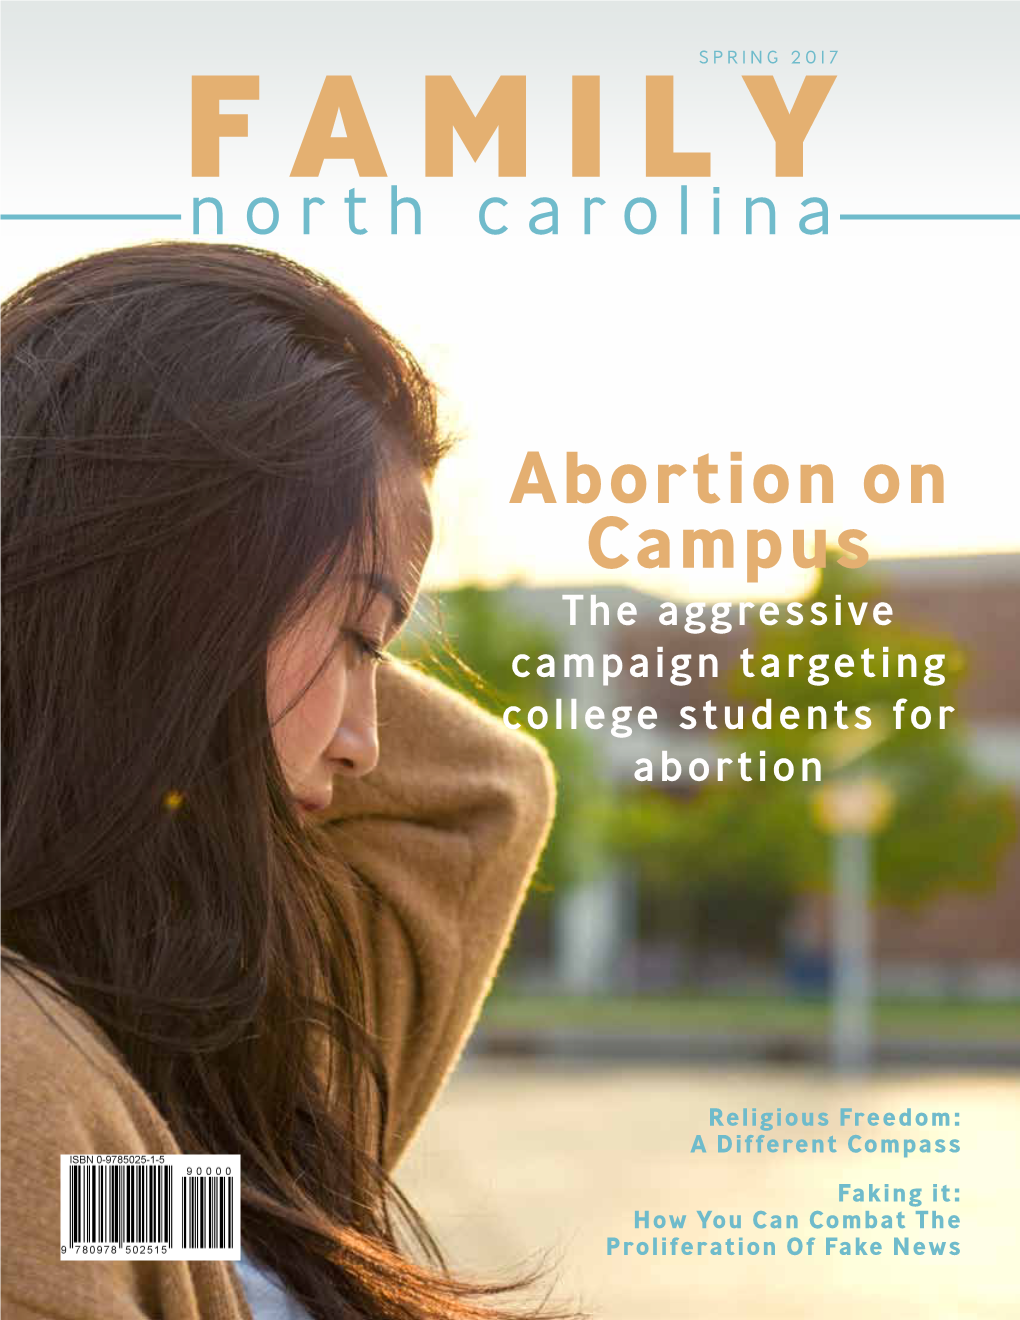 Abortion on Campus the Aggressive Campaign Targeting College Students for Abortion